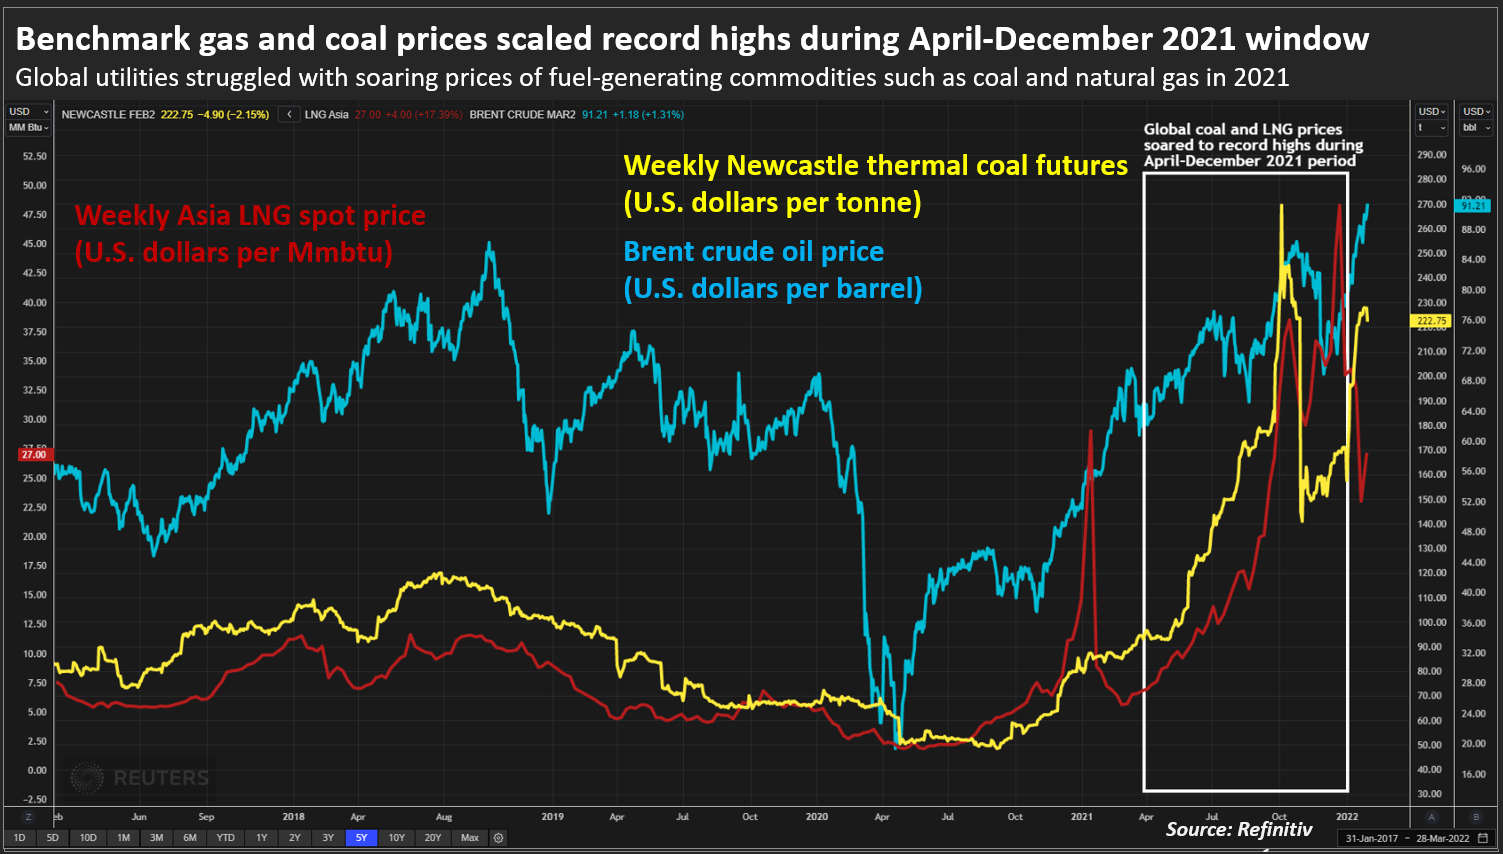 Benchmark gas and coal prices scaled record highs during April-December 2021 window